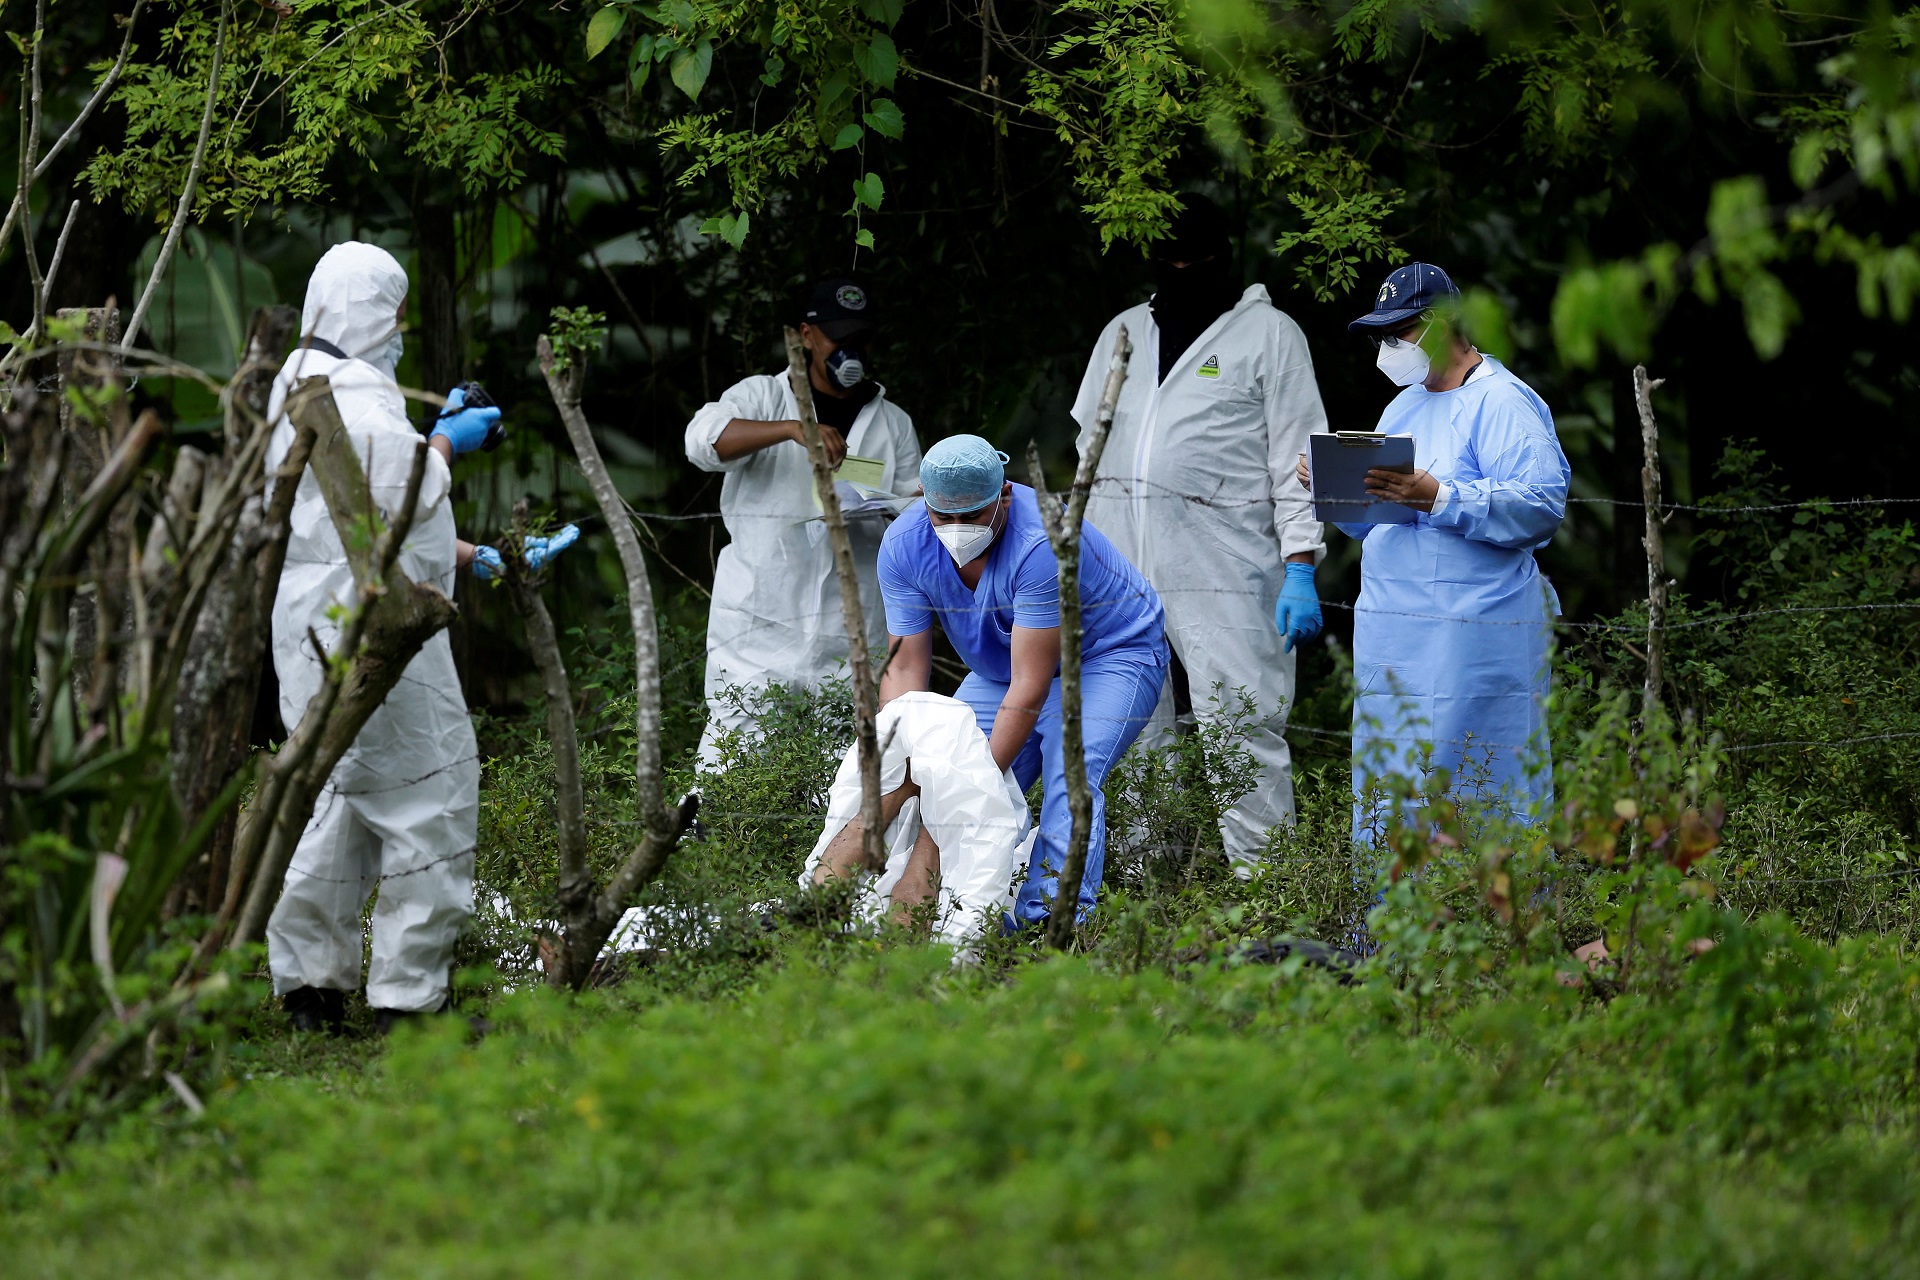 epa08714218 Forensics and police investigators work at the scene where the bodies of five people who were killed were found in San Julian, El Salvador, 01 October 2020. At least five people were killed in a village in the municipality of San Julian, in western El Salvador, the Attorney General's Office (FGR) reported on 01 October. According to the Prosecutor's Office, which shared information provided by the National Civil Police (PNC) in the place, the 'deprivation of liberty' of three people was reported on 30 September and now 'the notice of some deceased persons was received' in the Guacoco village.  EPA/Rodrigo Sura ATTENTION: GRAPHIC CONTENT  EPA-EFE/Rodrigo Sura ATTENTION: GRAPHIC CONTENT